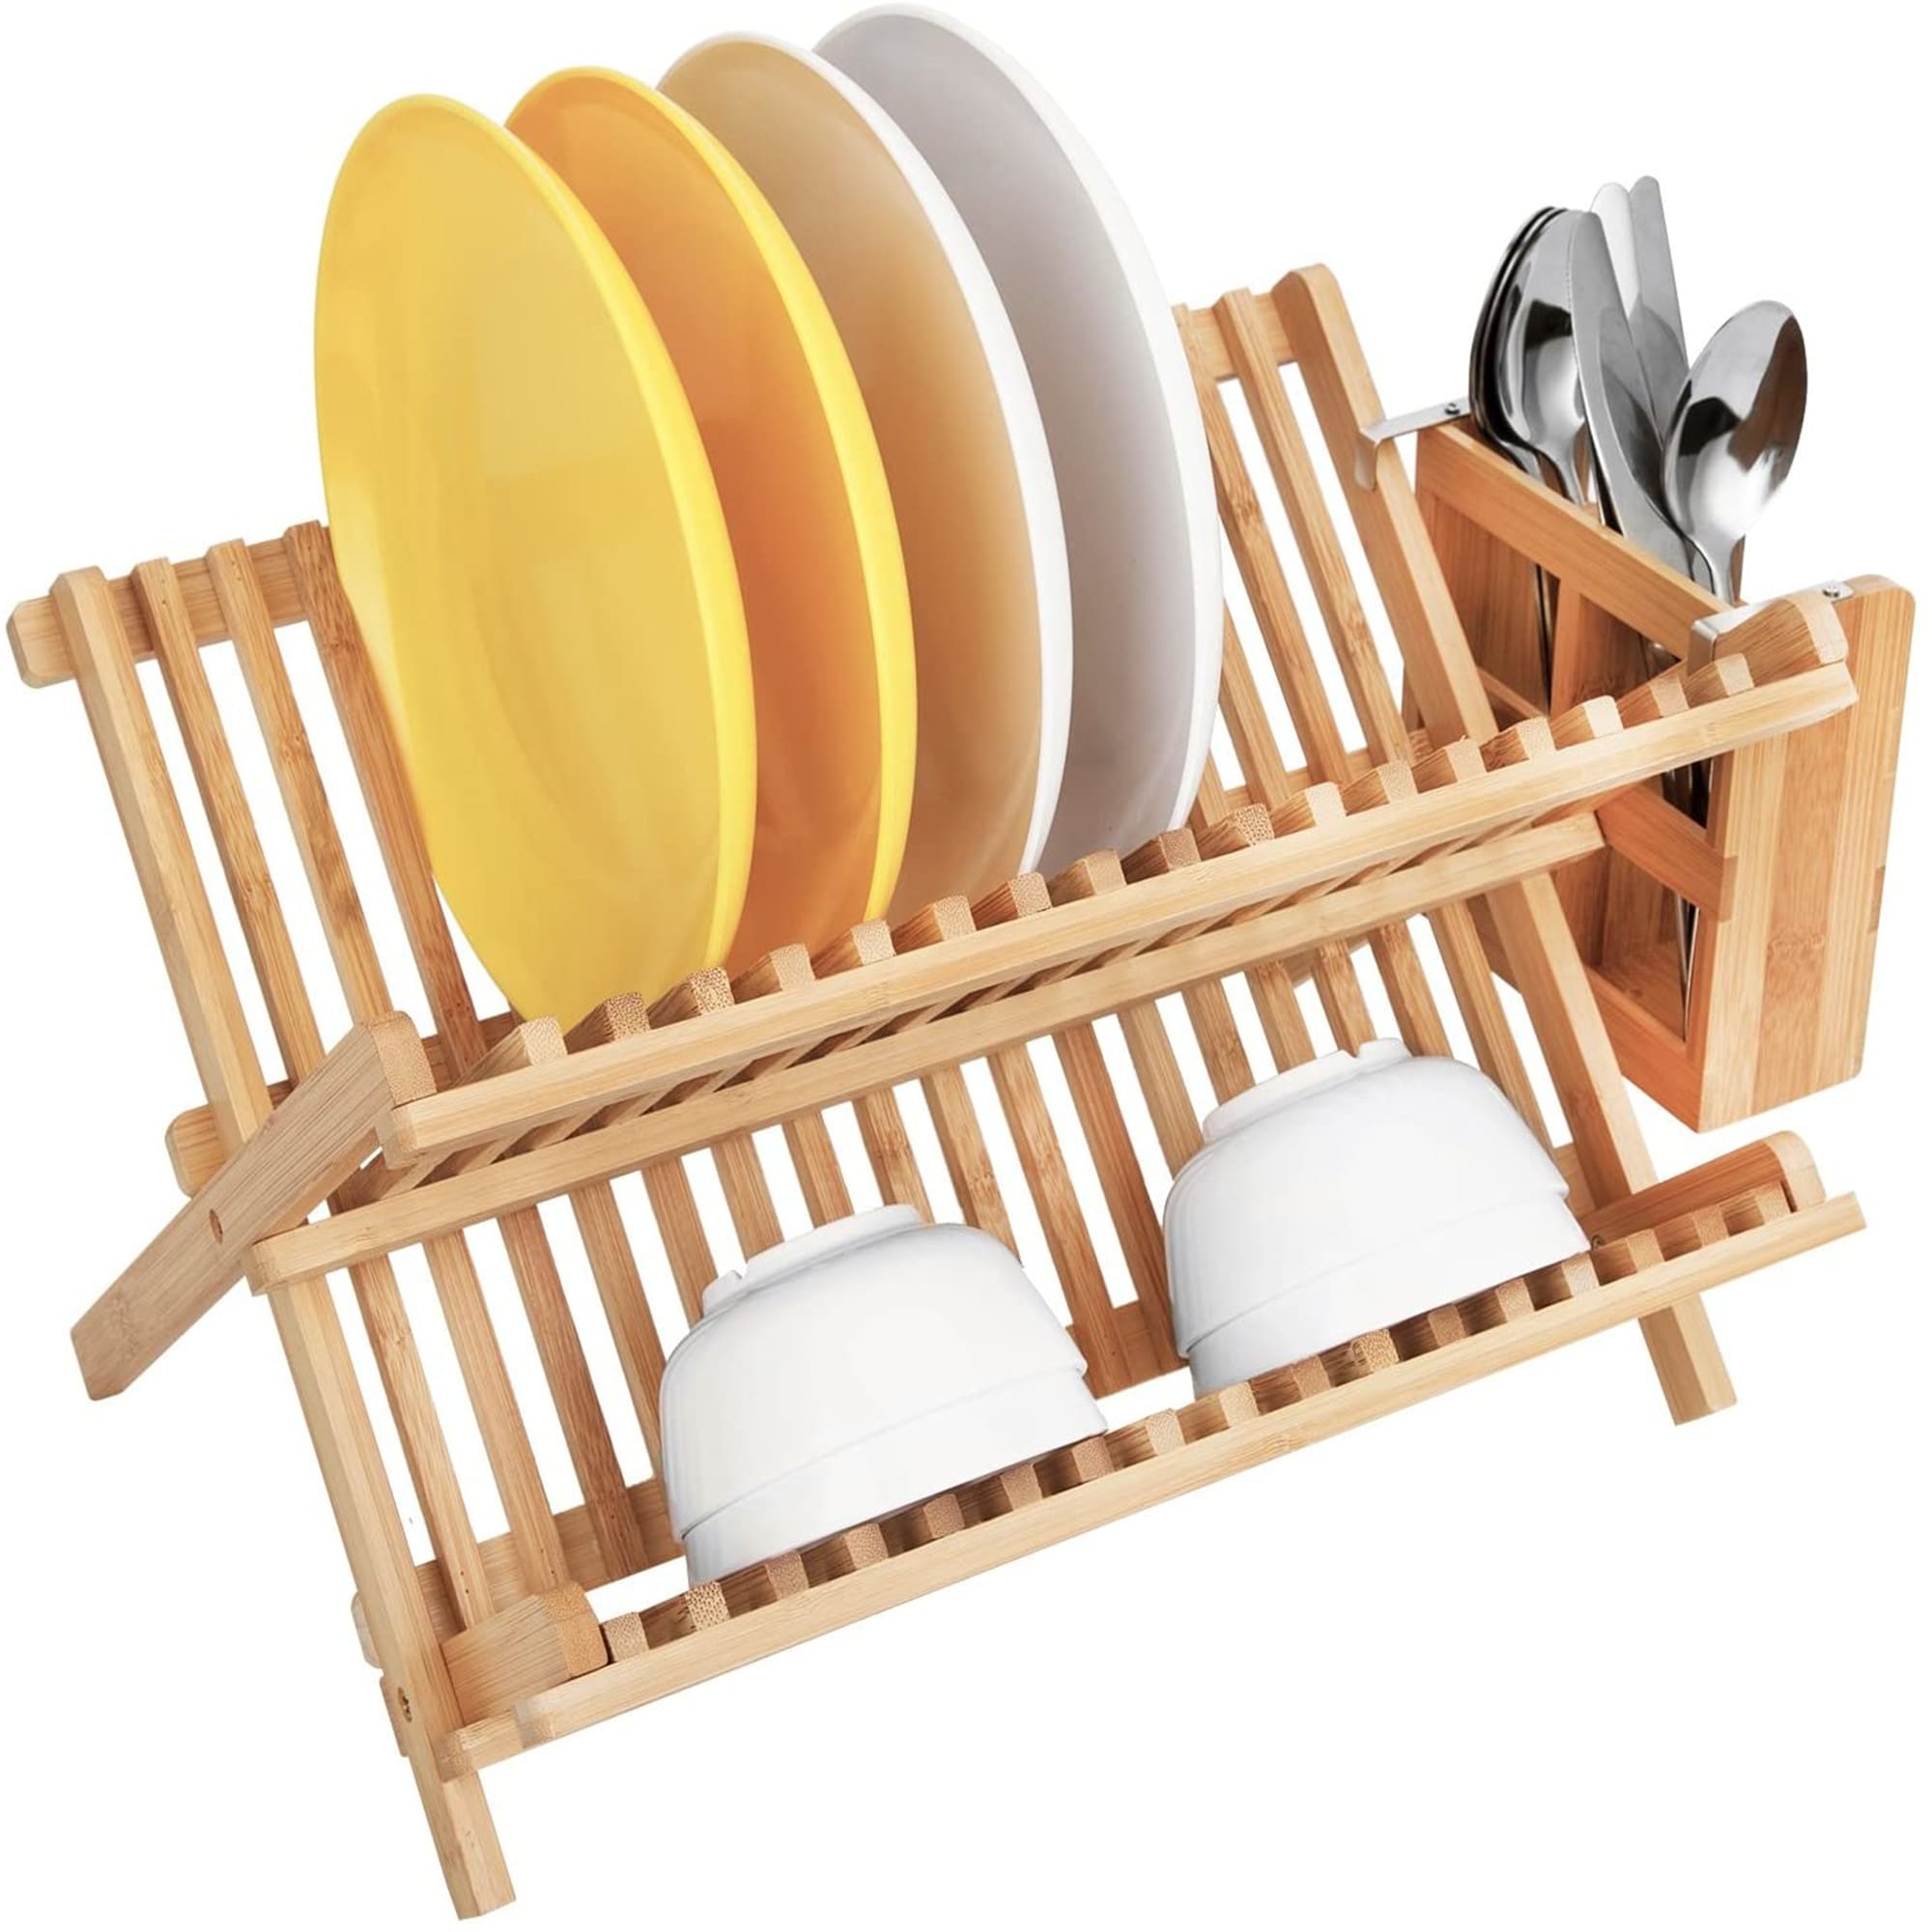 https://ak1.ostkcdn.com/images/products/is/images/direct/ff93637eb730530478647eec40380b4ff42991a1/Dish-Rack%2C-Bamboo-Folding-2-Tier-Collapsible-Drainer-Dish-Drying-Rack-%281%2C-Dish-Rack-With-Utensil-Holder%29.jpg